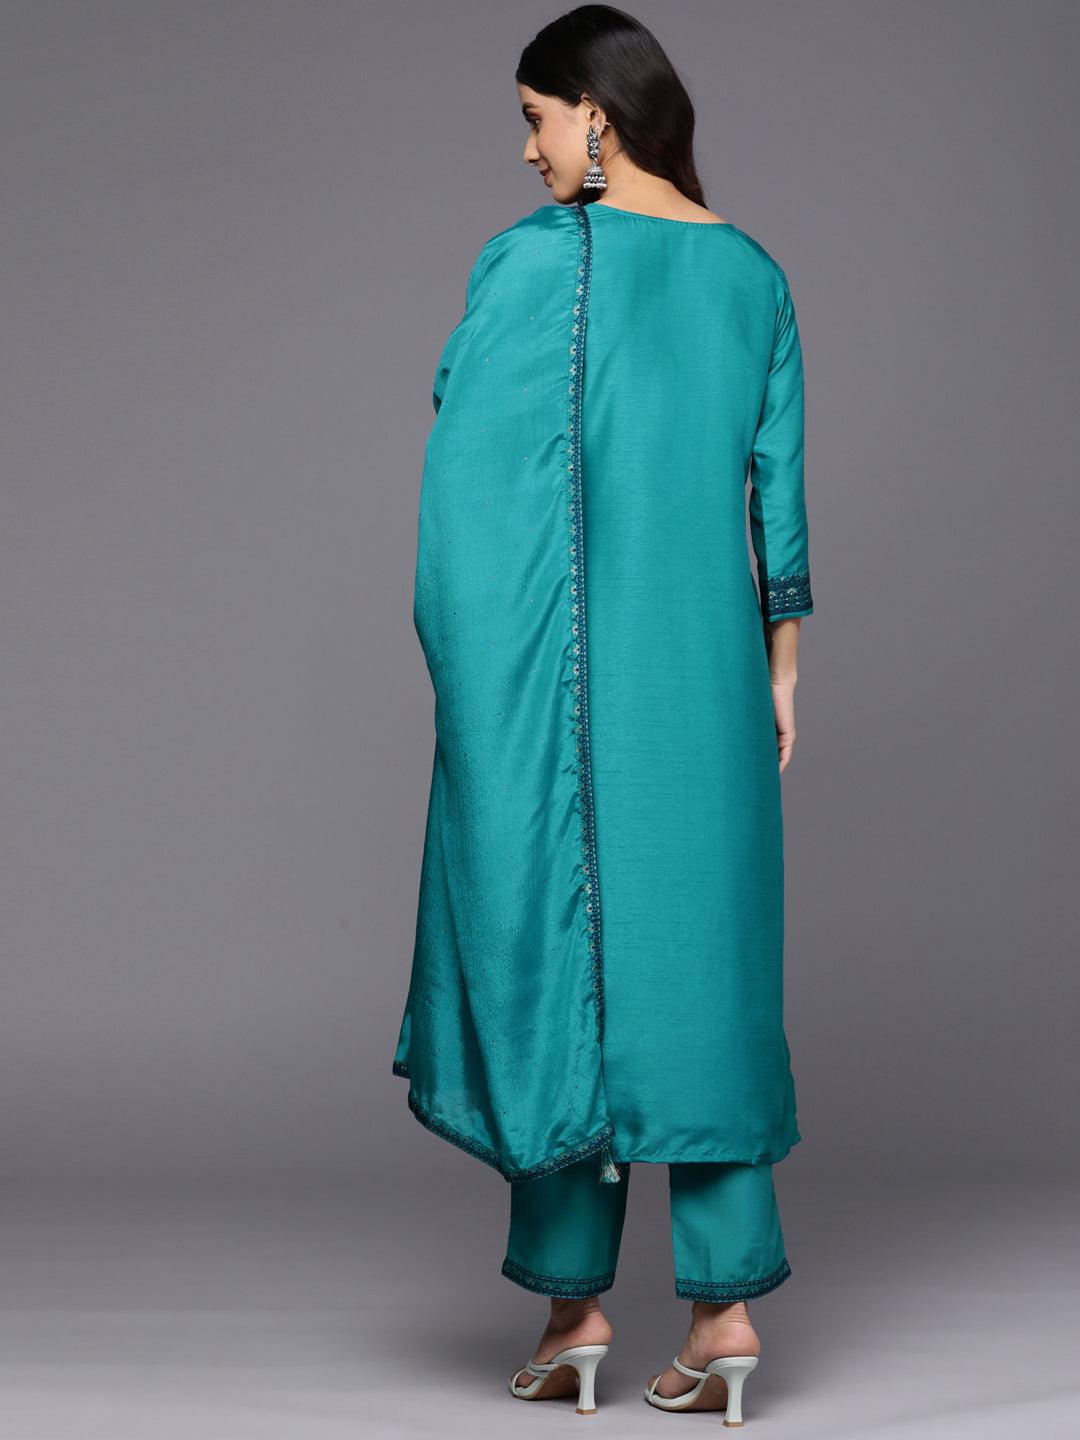 Turquoise Blue Self Design Silk Blend Straight Suit Set With Trousers - Libas